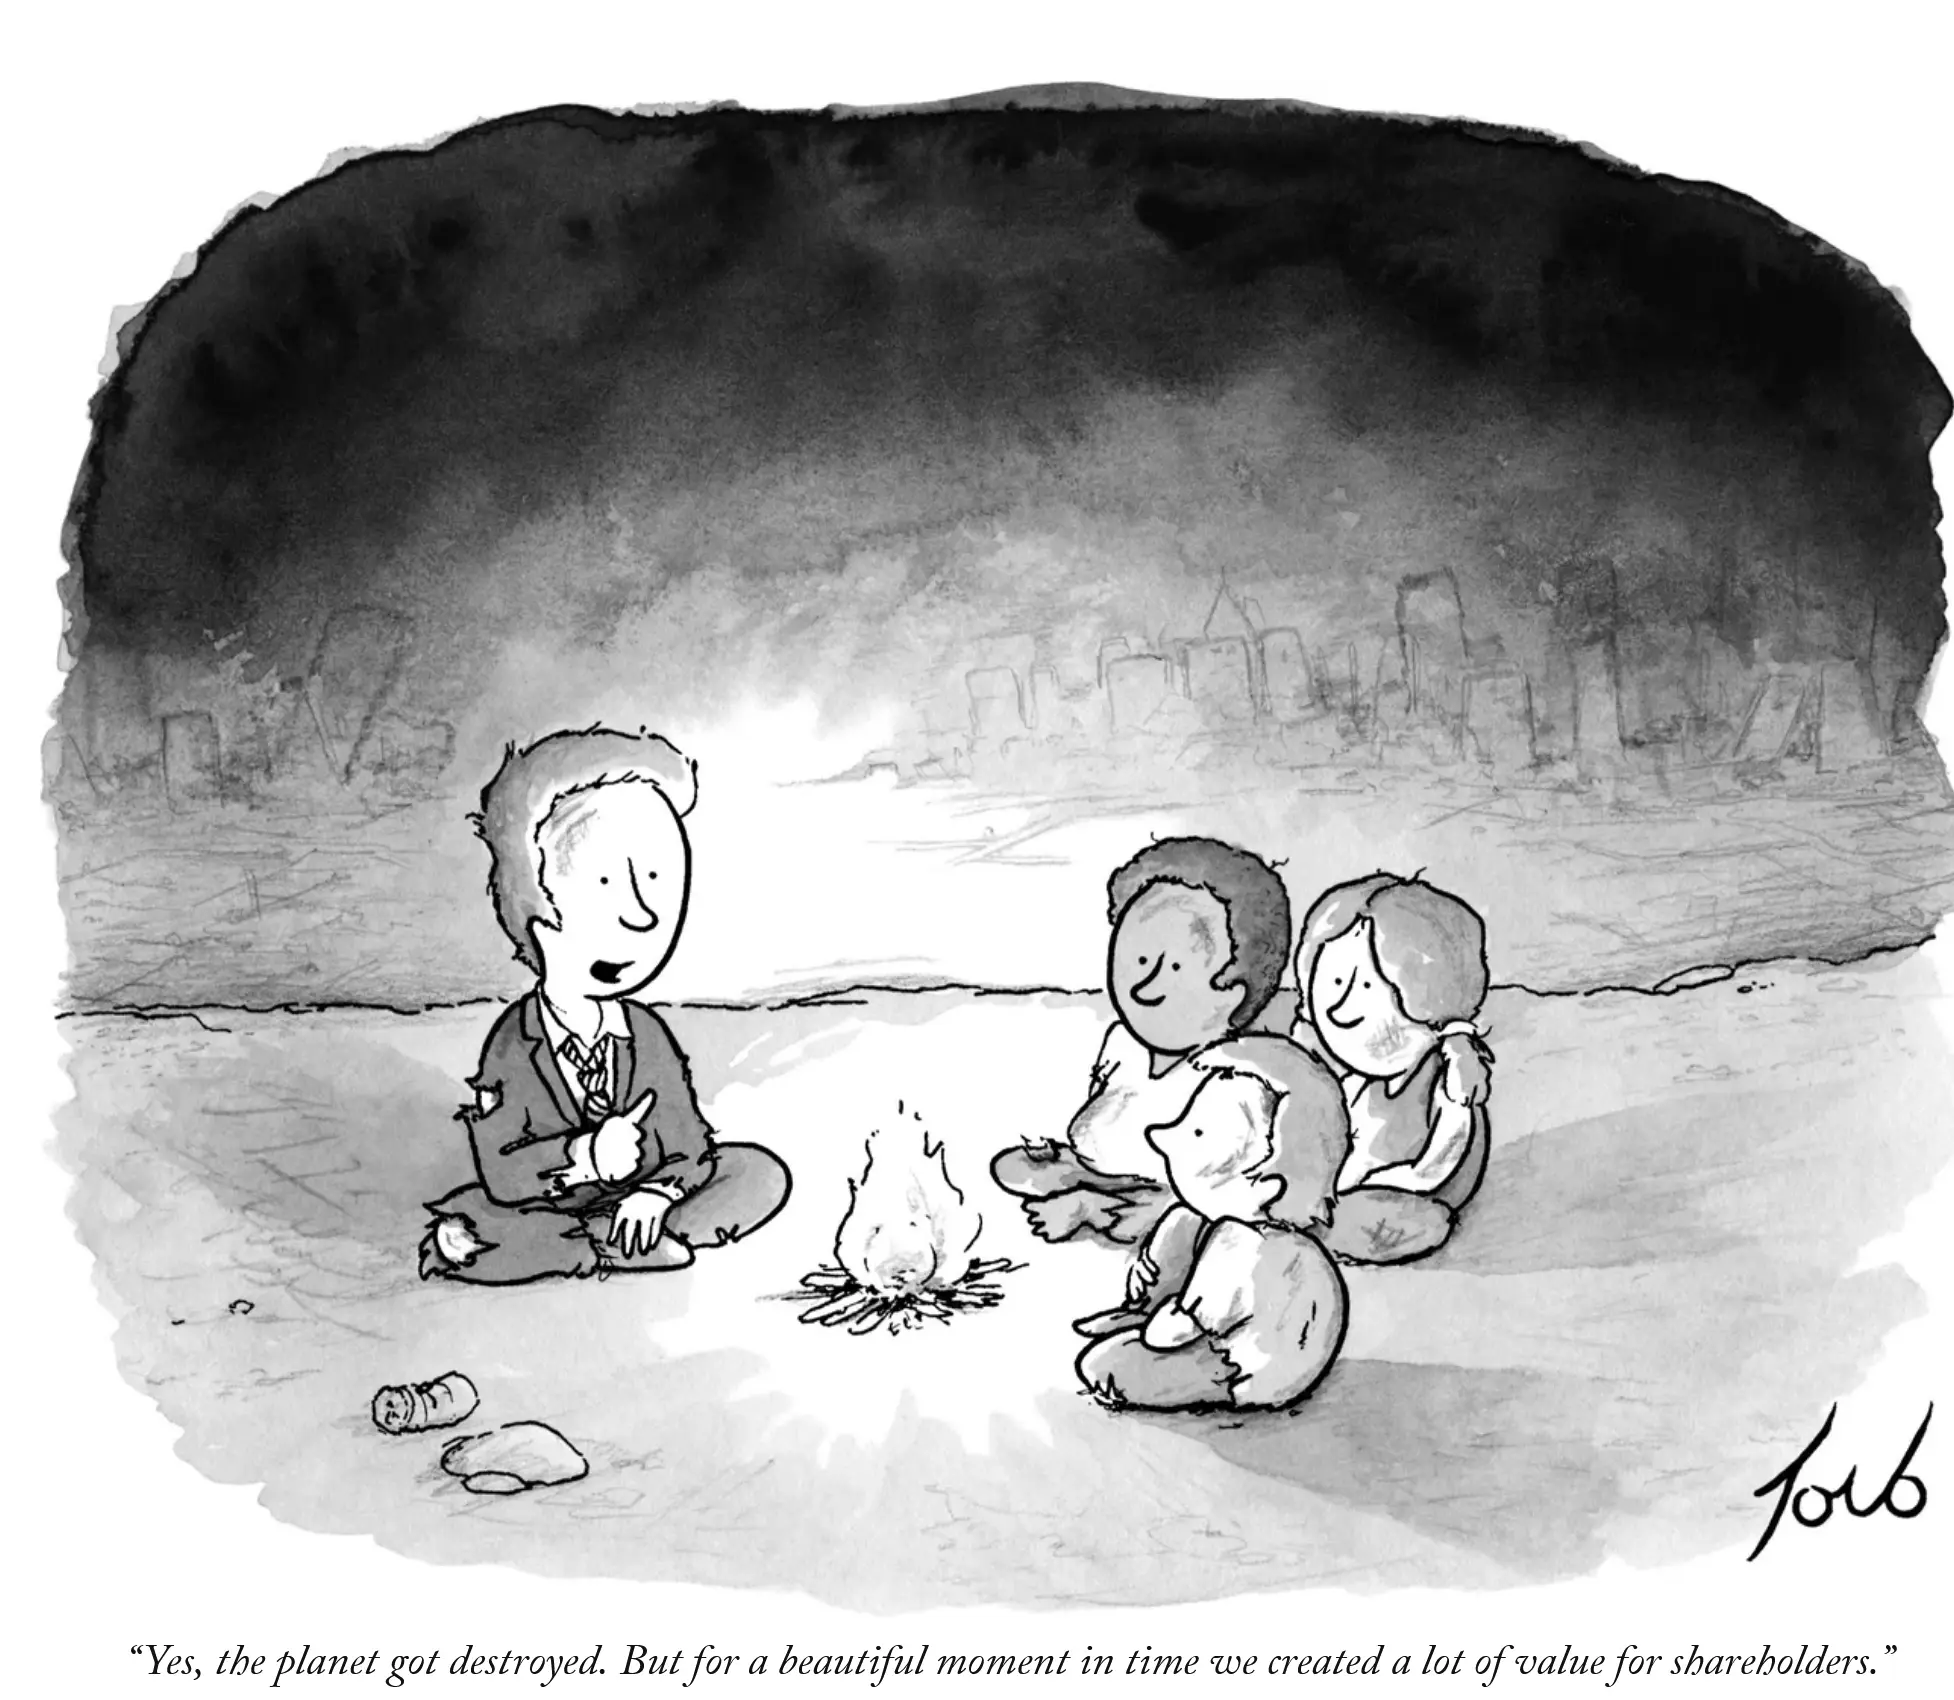 Black and white cartoon.  Man in ripped suit and tie sitting across a campfire from a group of children.  Vague ruined city in the background.  Caption: “Yes, the planet got destroyed. But for a beautiful moment in time we created a lot of value for shareholders.”